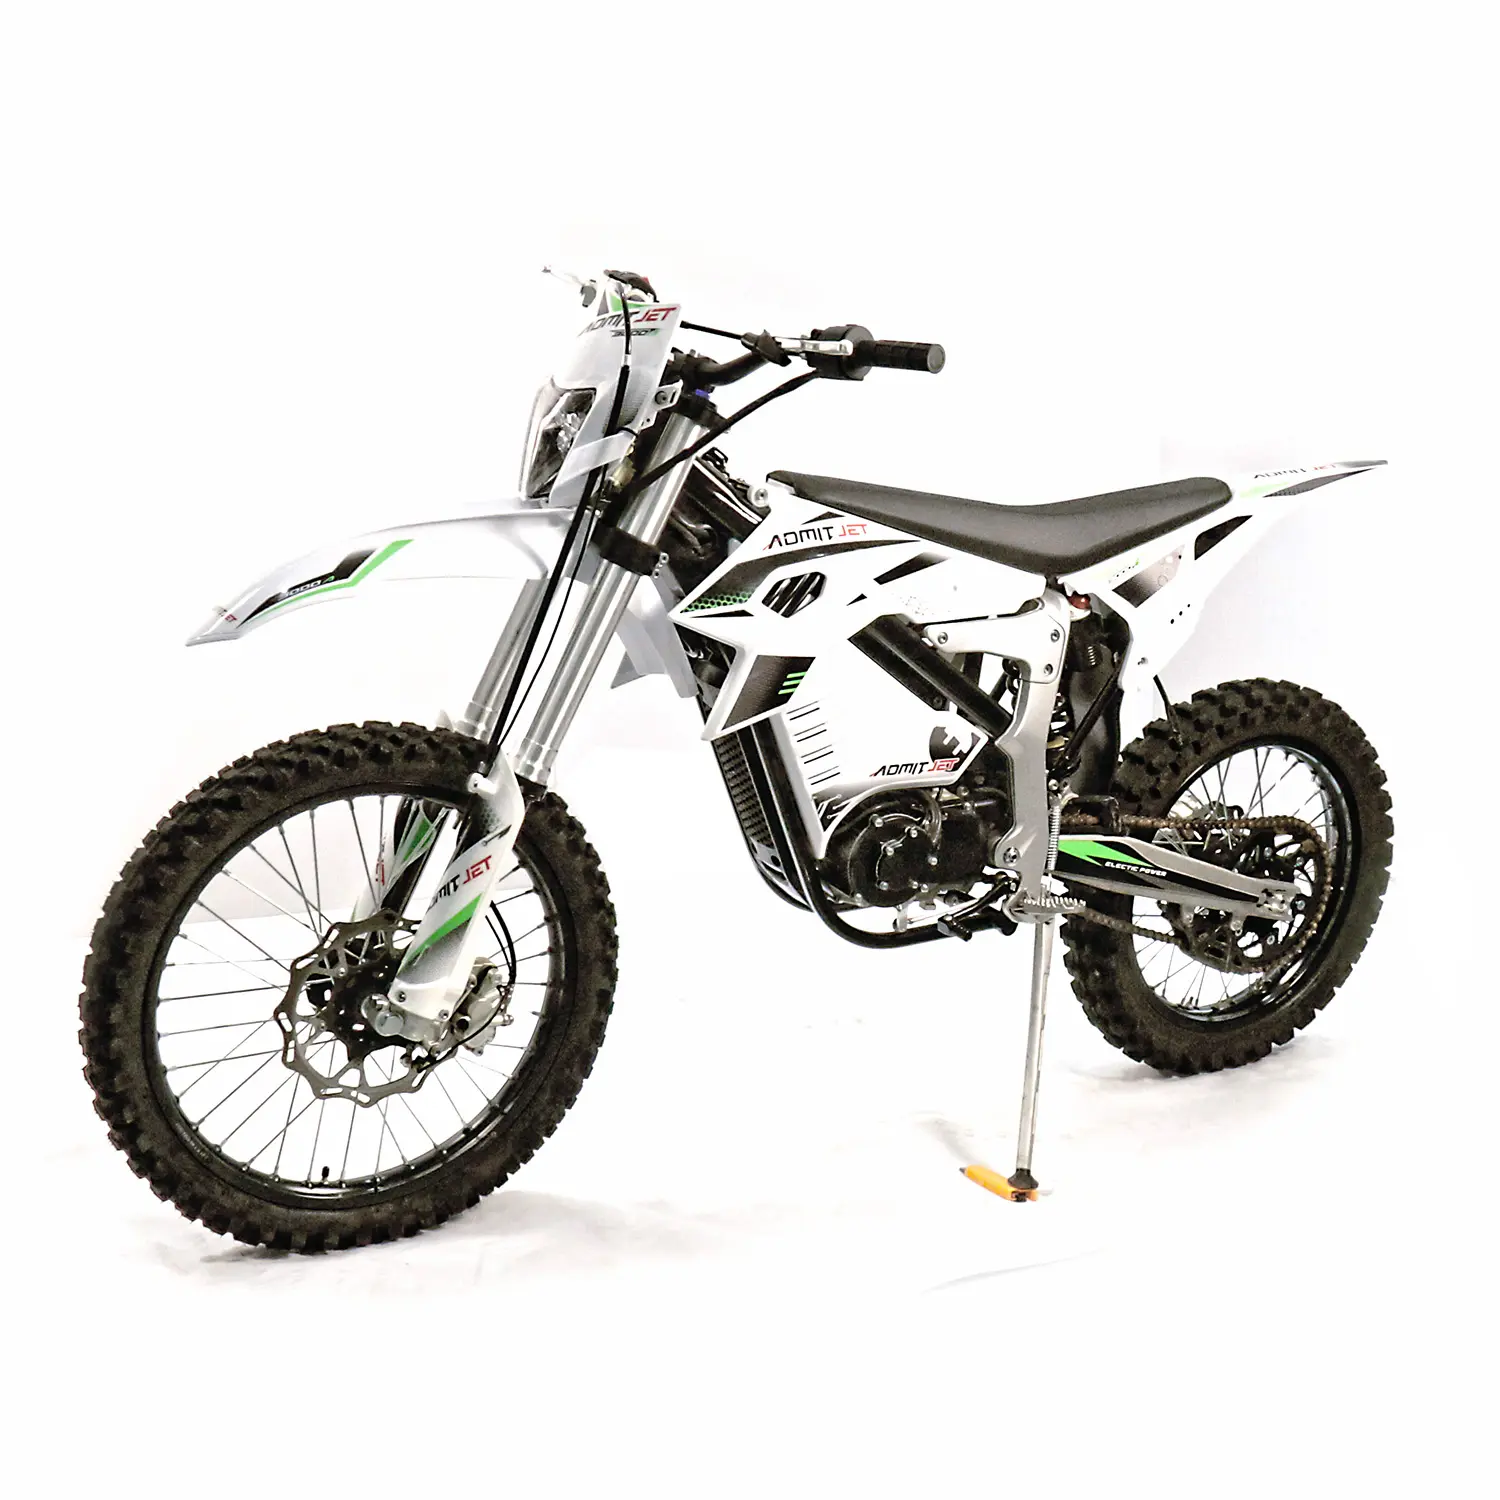 Oem Off Road Full Size Fast Super Moto Bike Electric Offroad Motorcycle For Adults With Longest Range